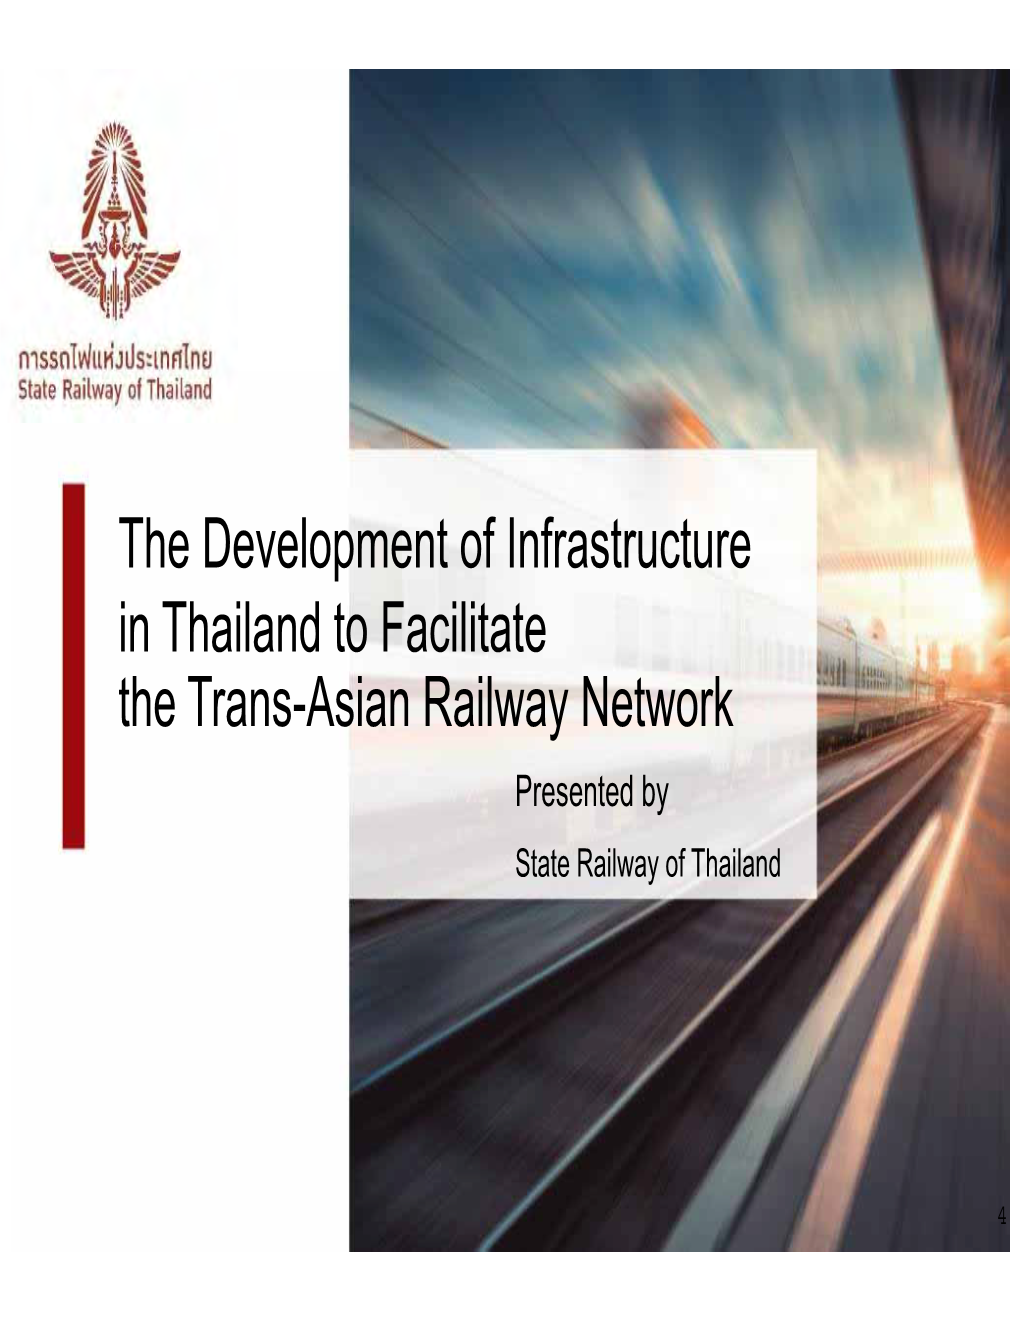 The Development of Infrastructure in Thailand to Facilitate the Trans-Asian Railway Network Presented by State Railway of Thailand